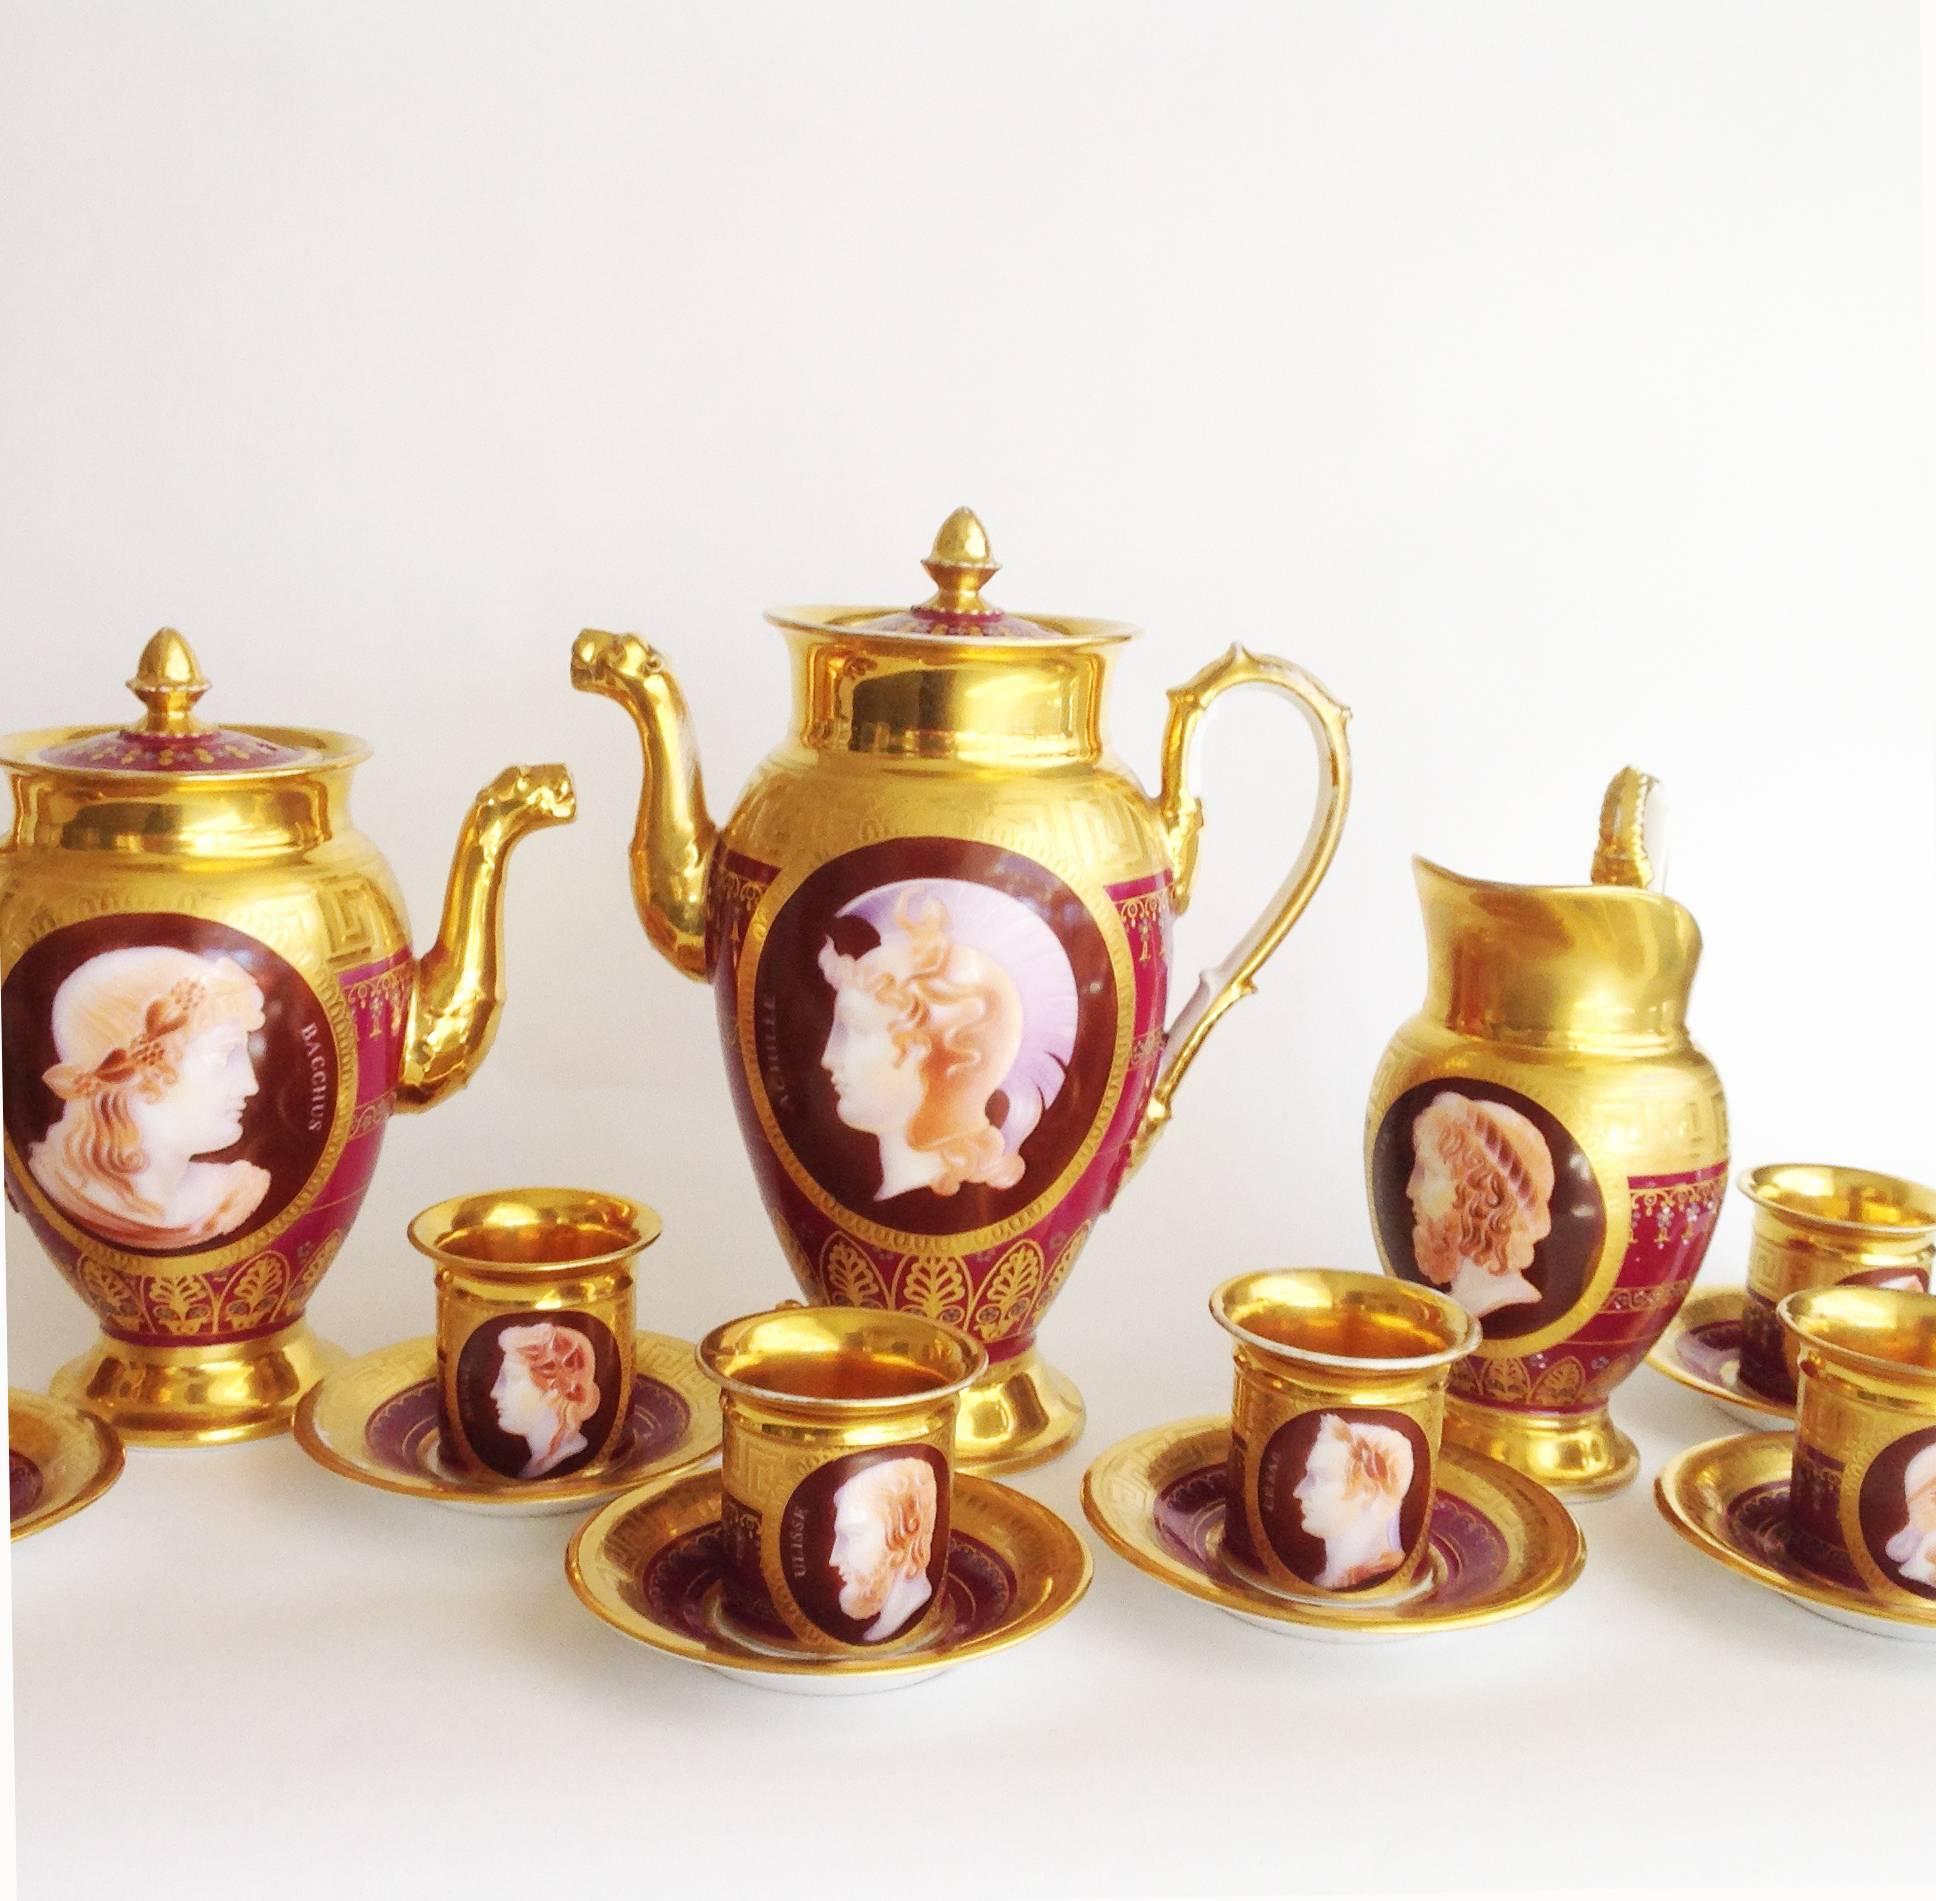 French, Schoelcher Paris porcelain coffee service, comprising a coffeepot, hot water pot, creamer, sugar and eight cups and saucers, all of gold grounds decorated with matte gilt Greek key motif, centering a finely painted silhouette of a Greek god